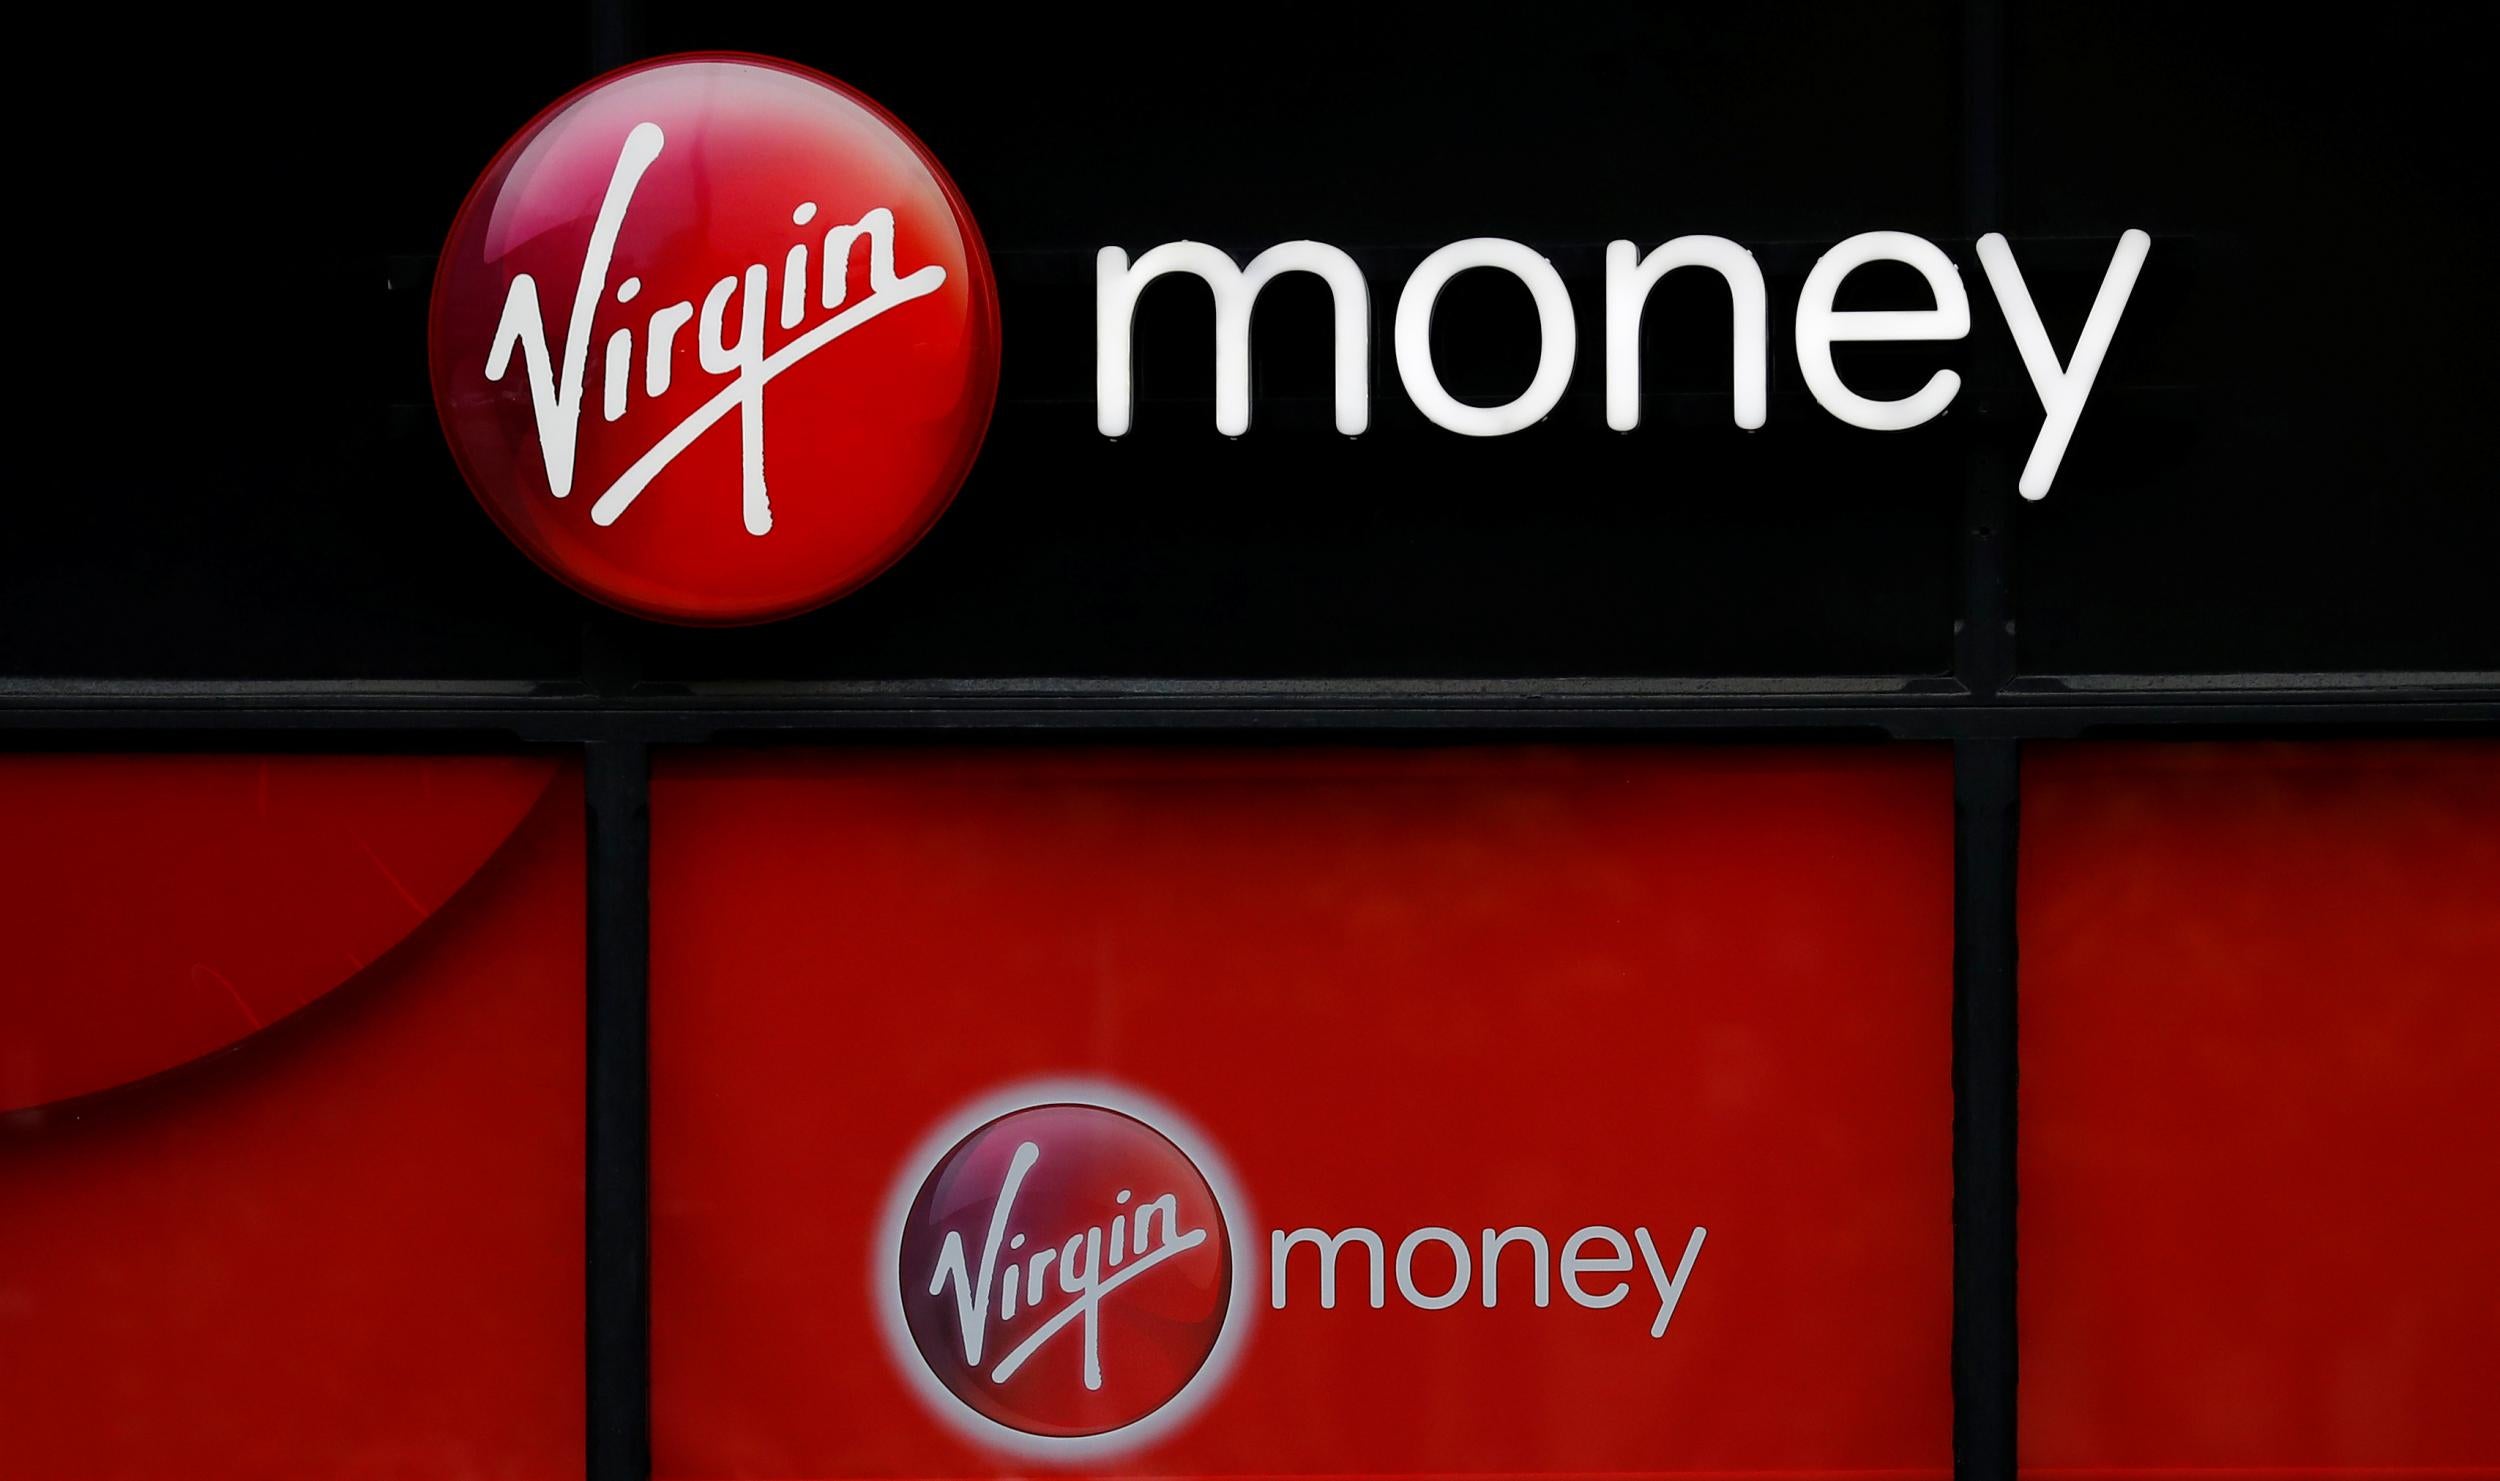 The new combined group will operate under the Virgin Money brand